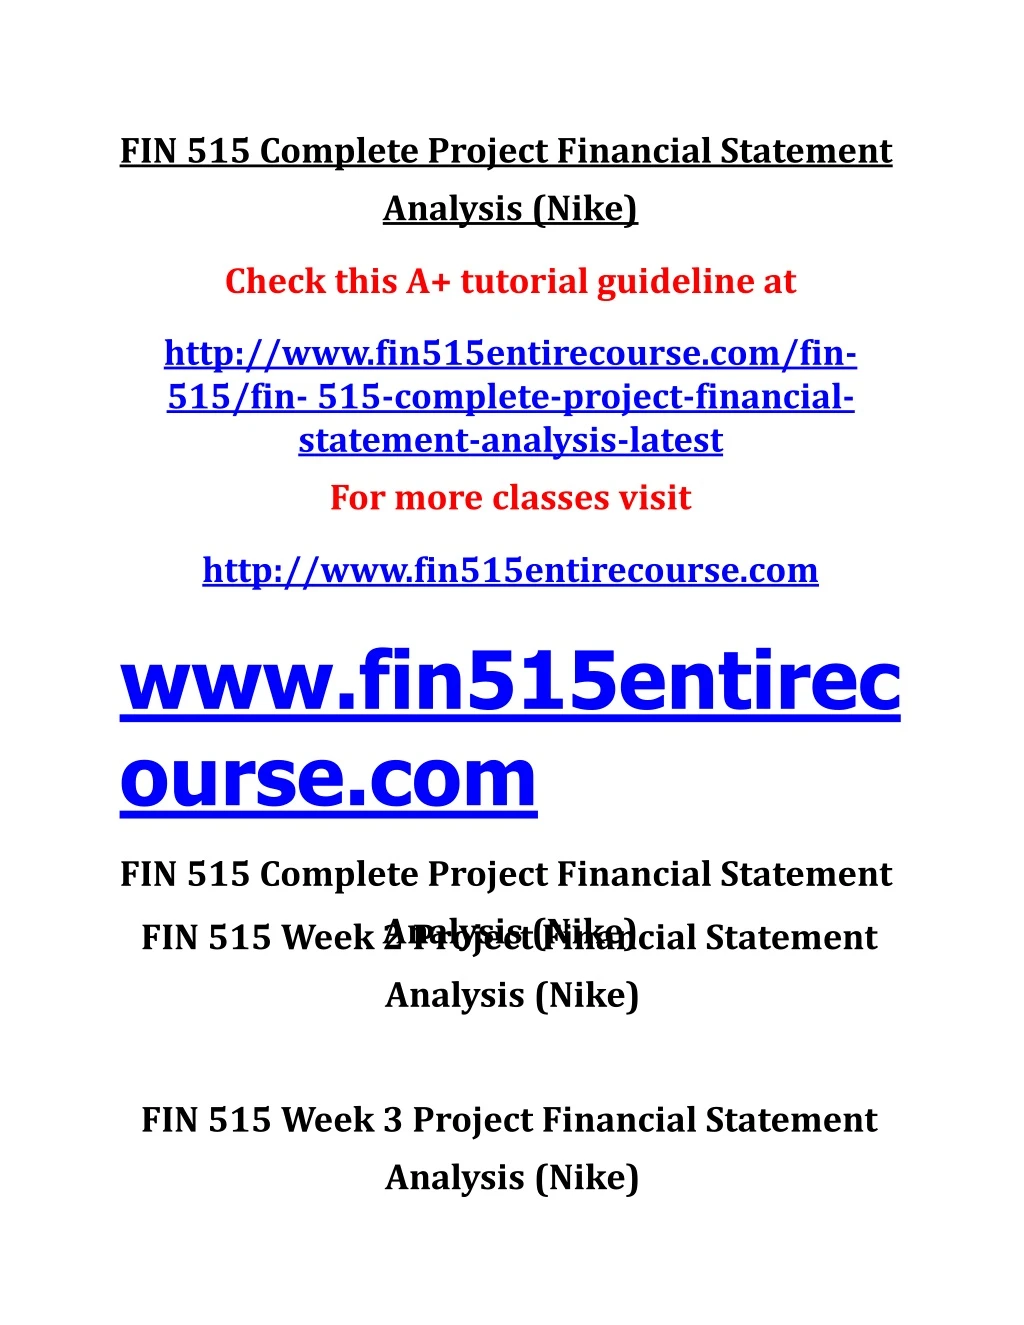 fin 515 complete project financial statement